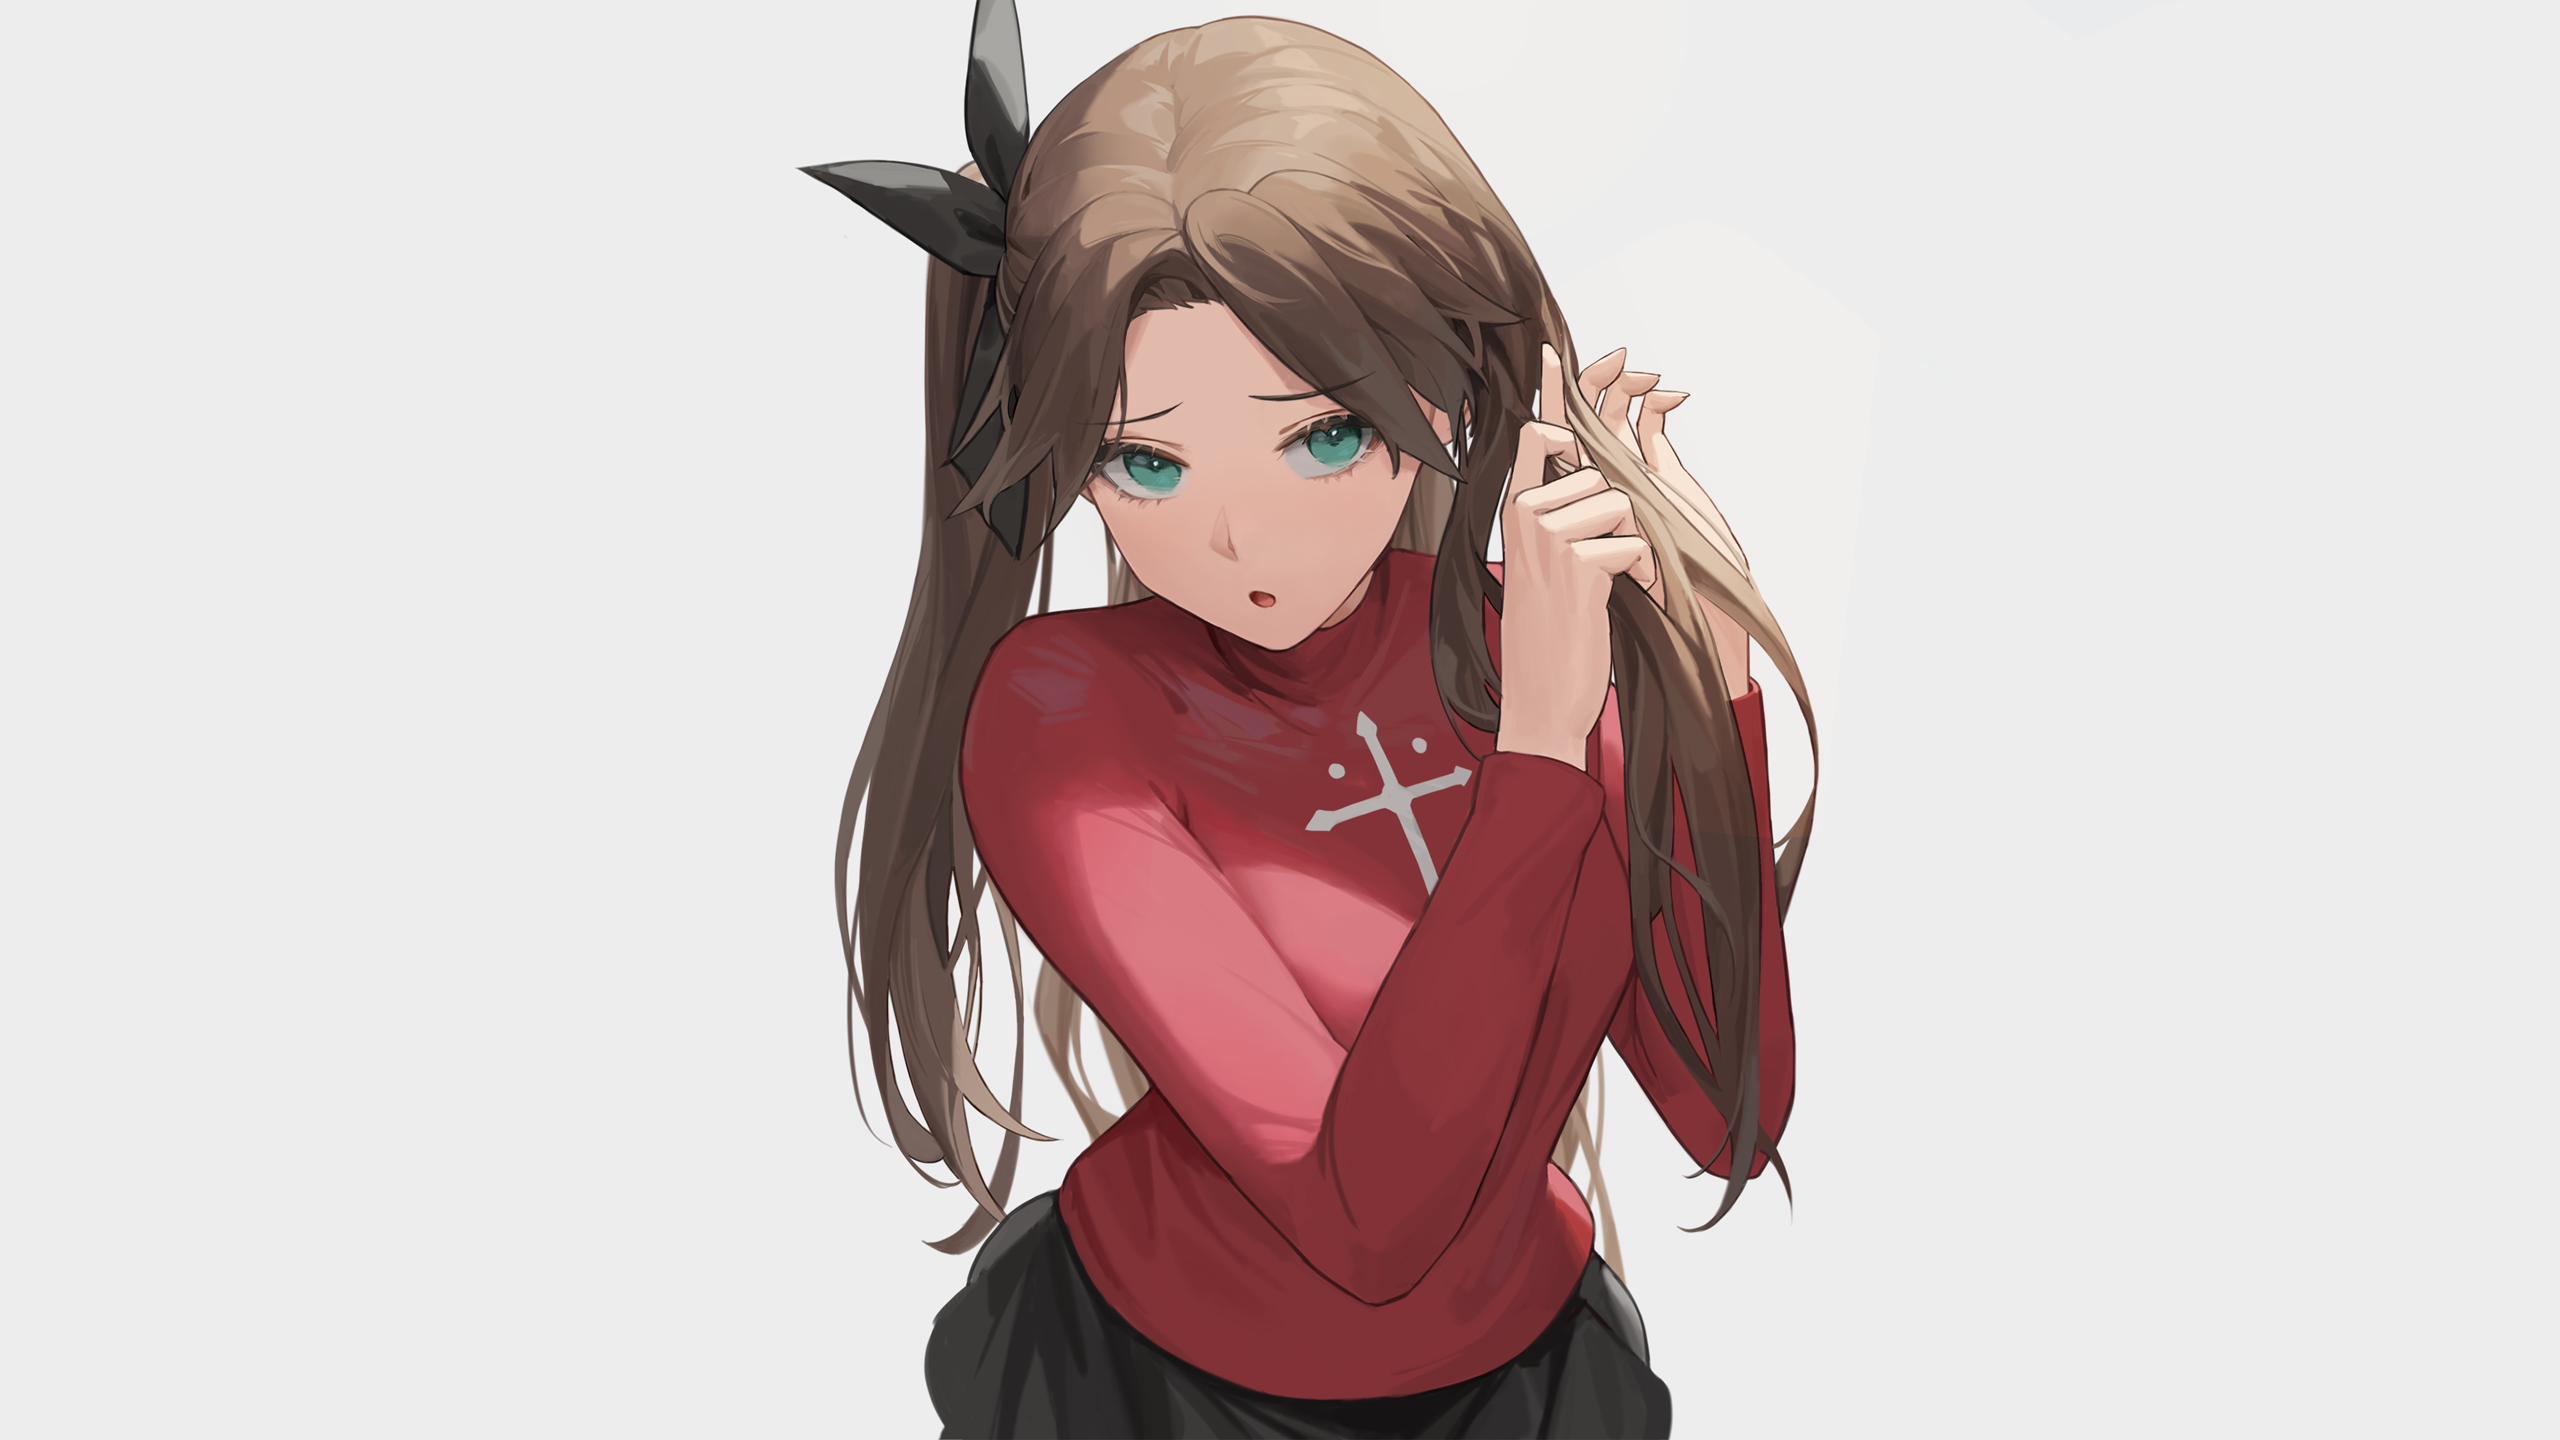 Anime Anime Girls Fate Series Fate Stay Night Tohsaka Rin Pleated Skirt Twintails Open Mouth Looking 2560x1440